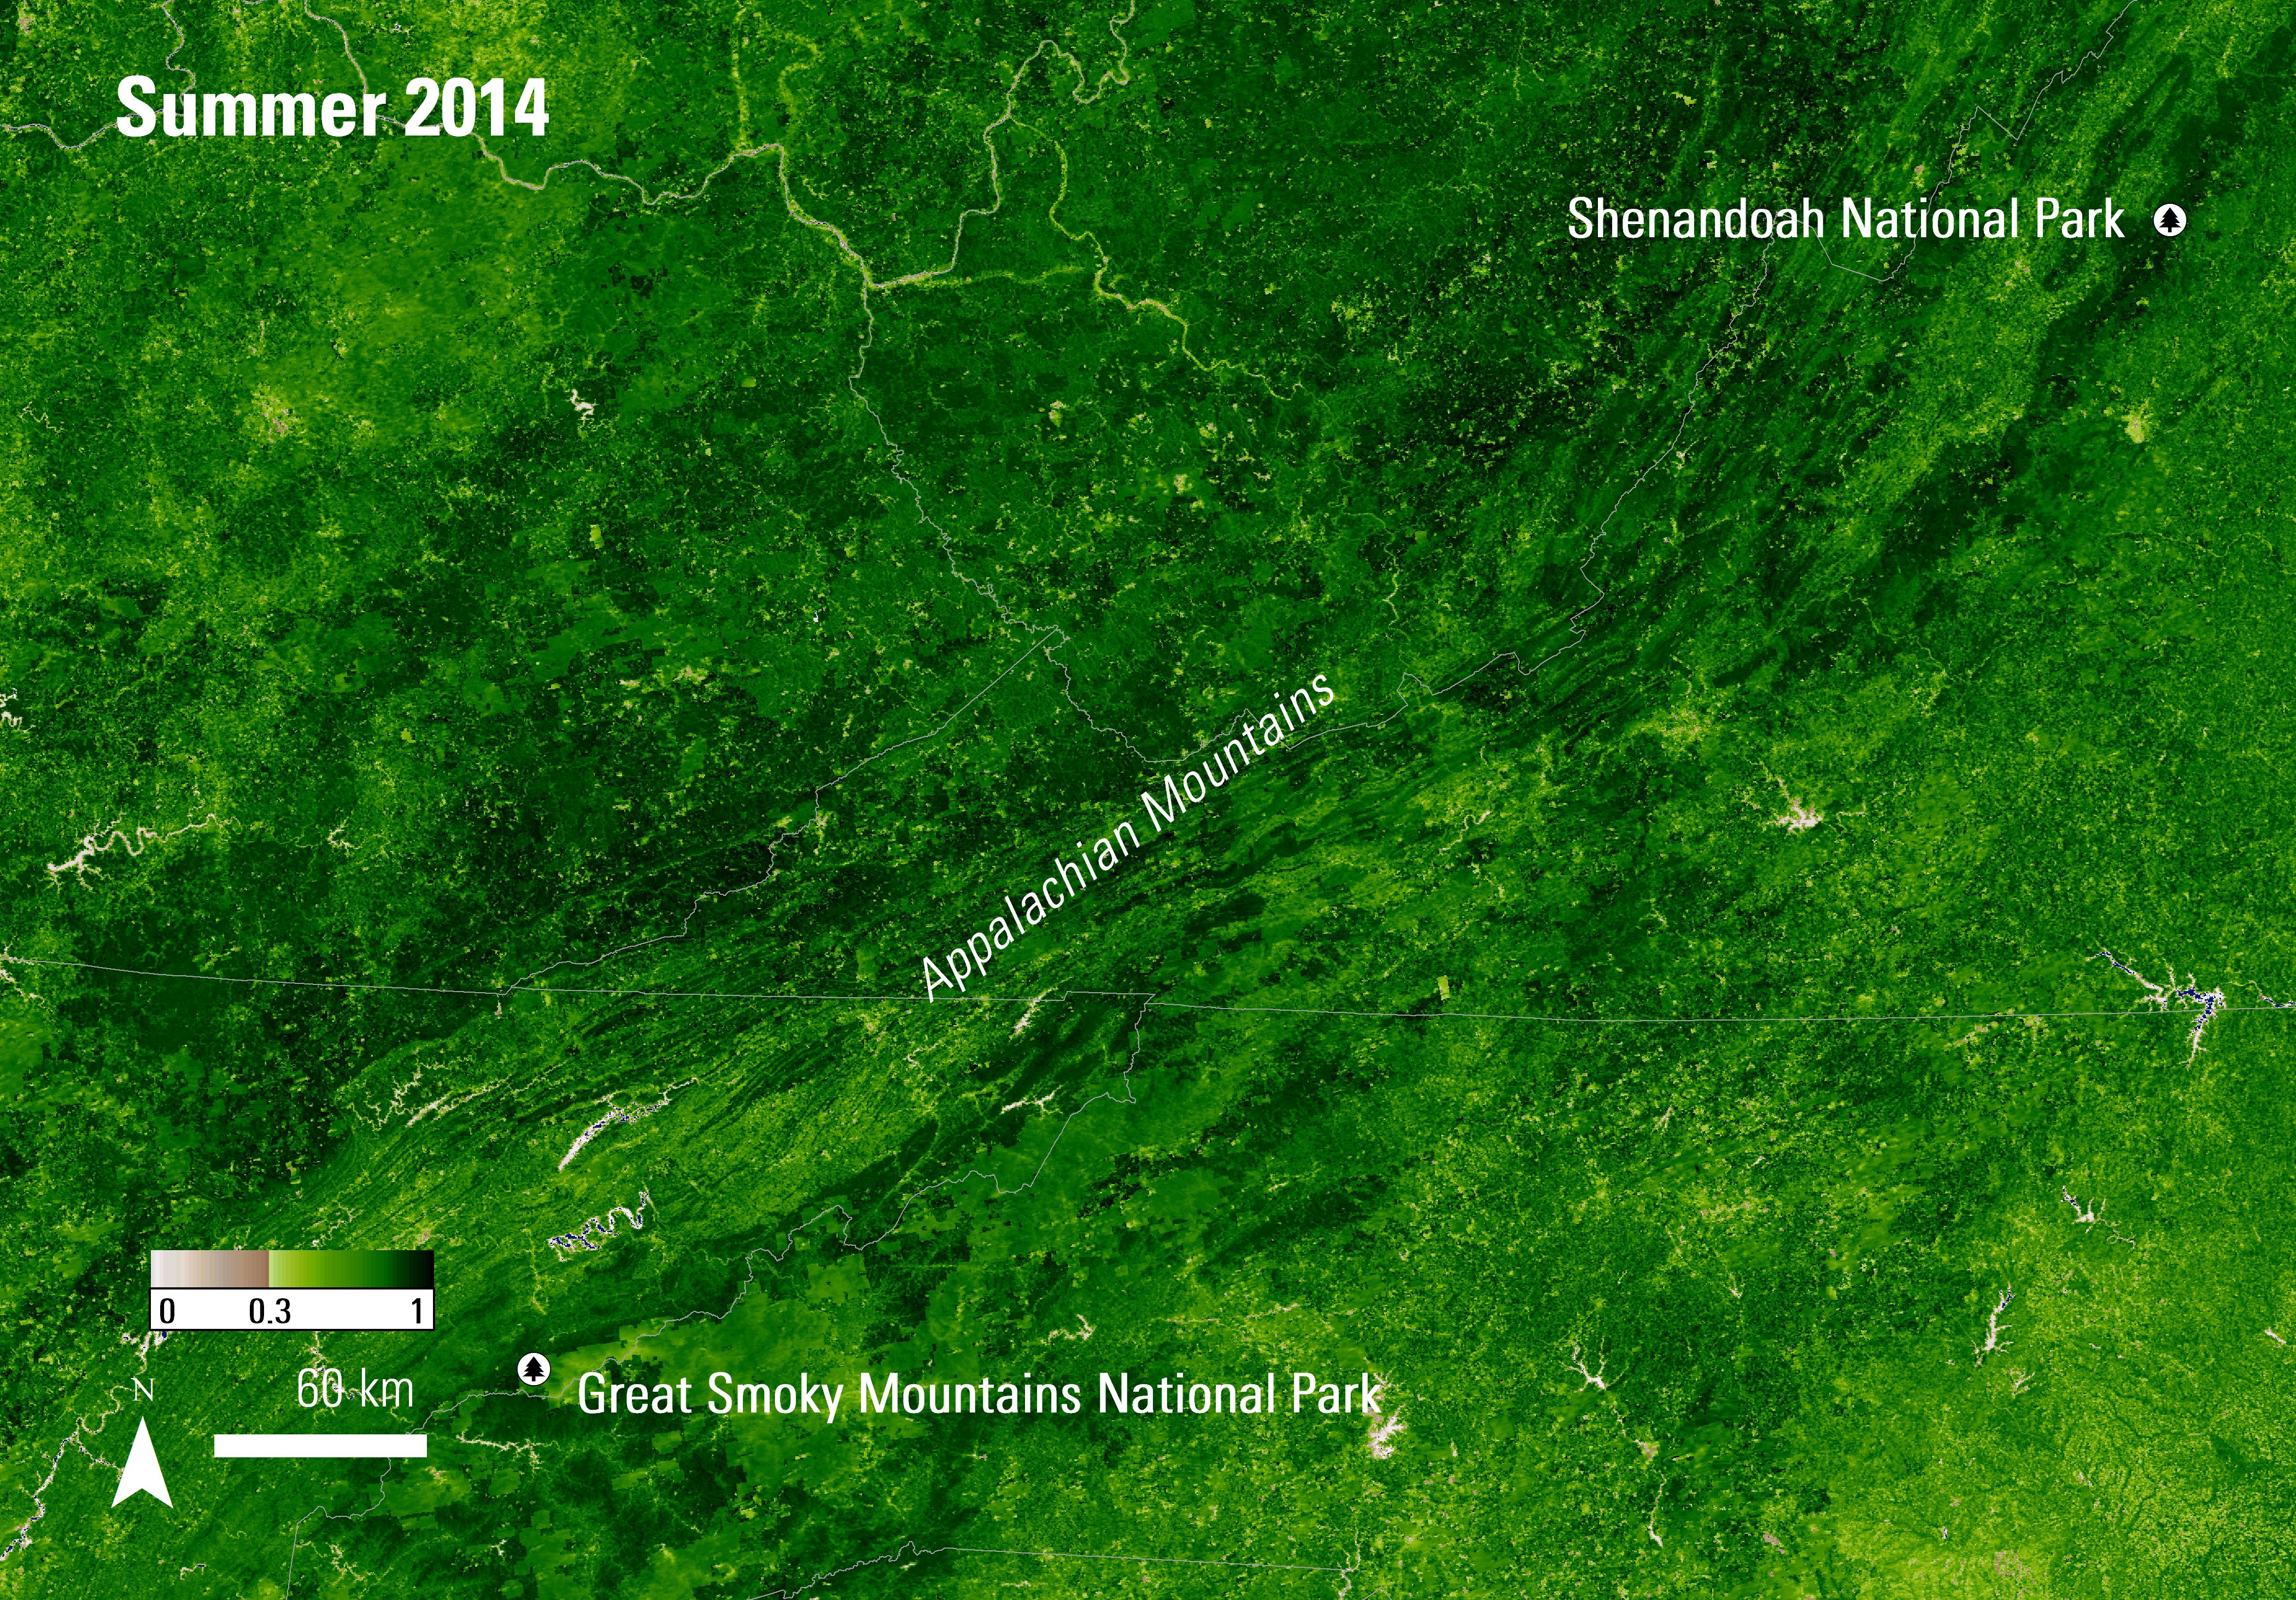 MODIS 250-meter EVI image from summer (June 18 - July 3, 2014) over the Appalachian Mountains.